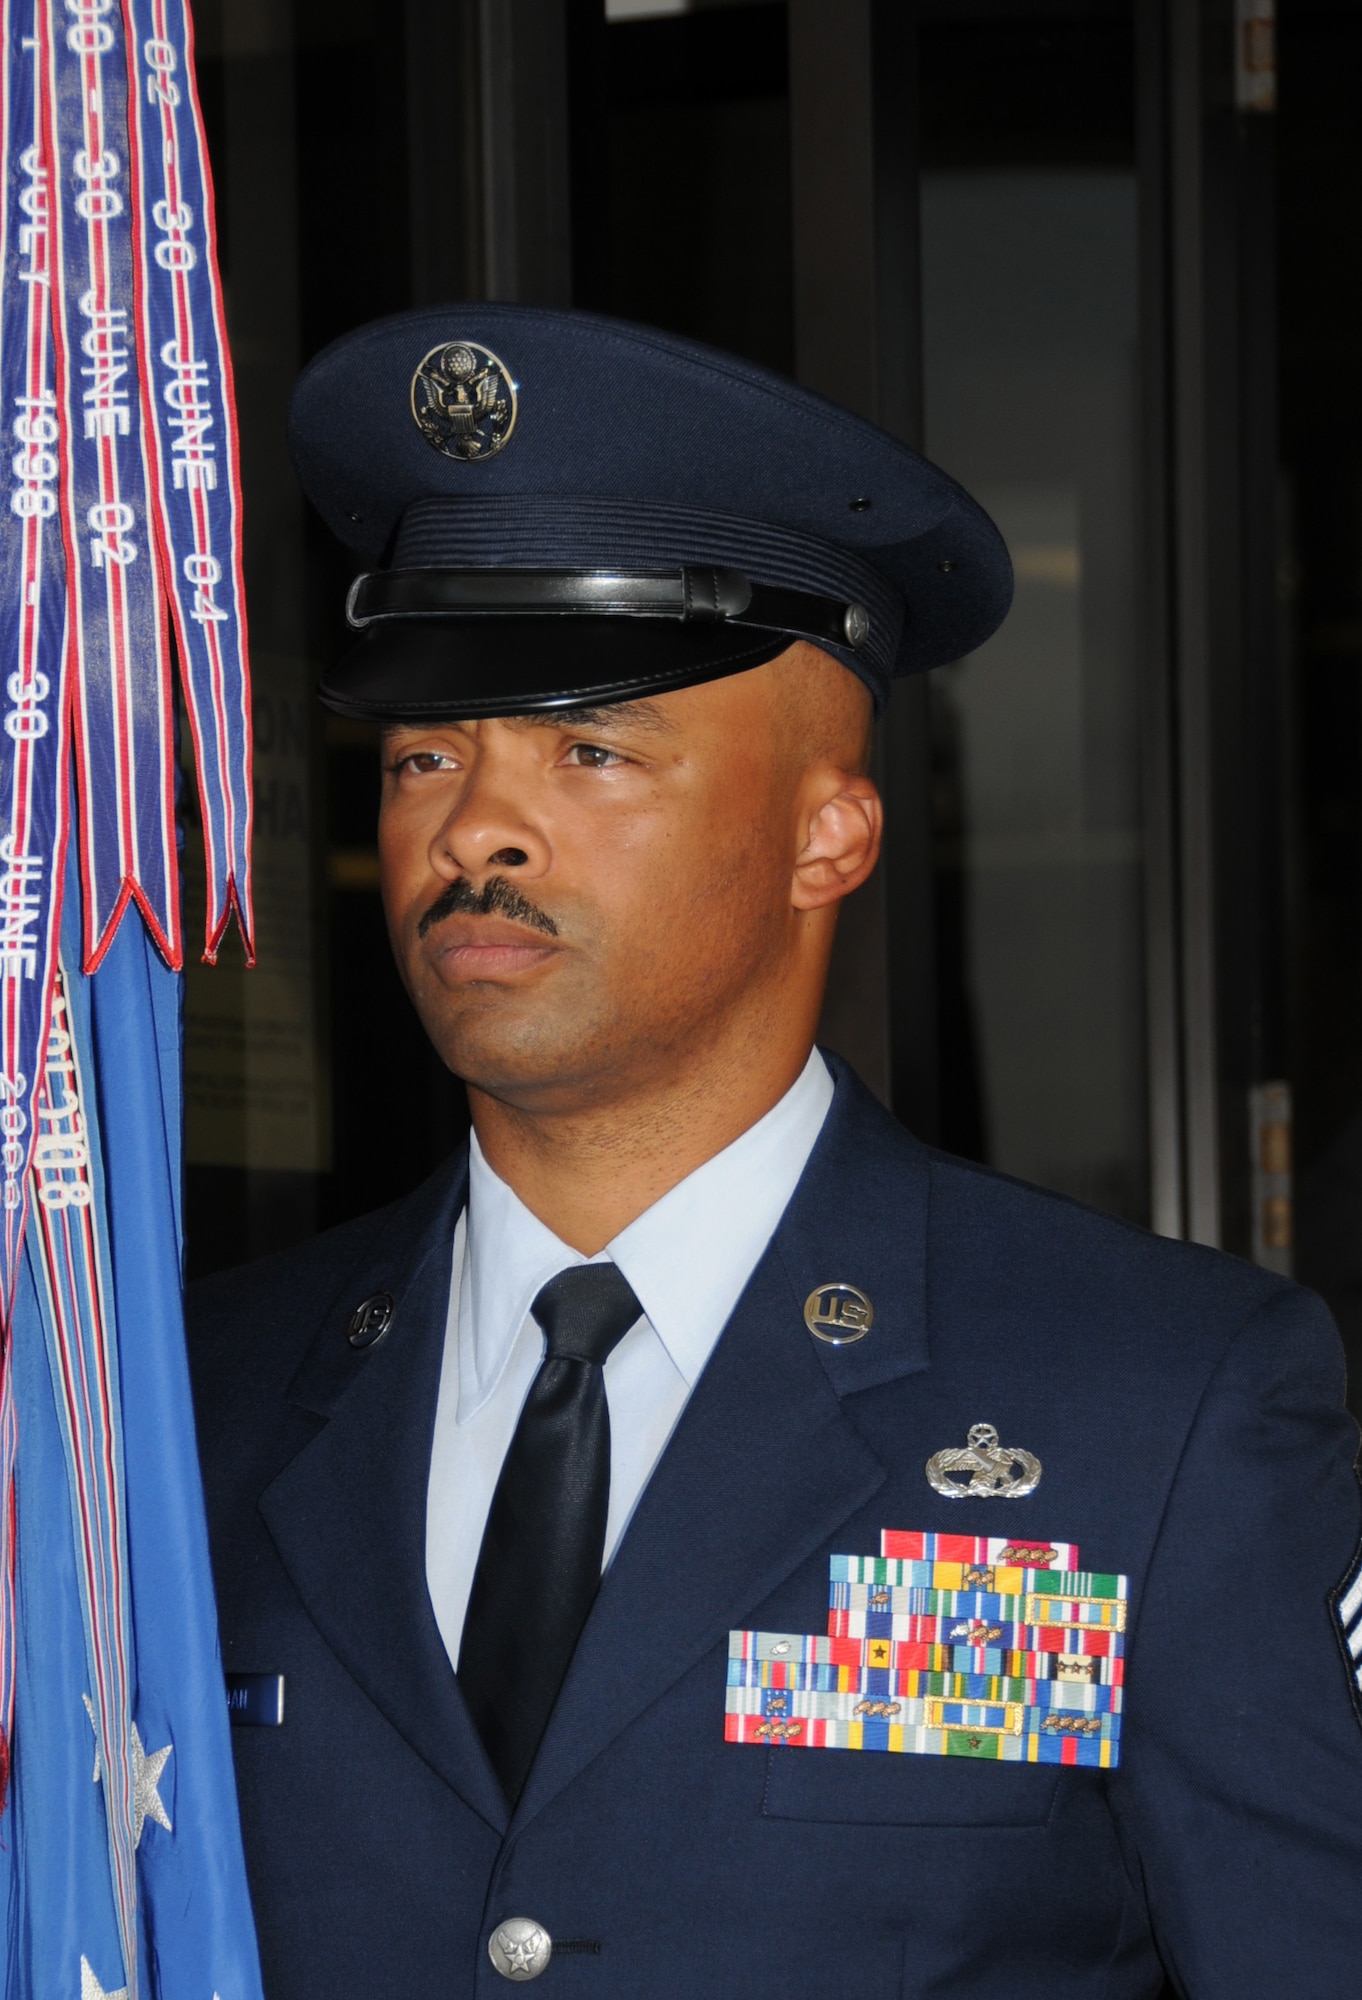 Chief Jordan carried the 2nd Air Force’s guidon at the change of command ceremony Sept. 9.  (U.S. Air Force photo by Kemberly Groue)